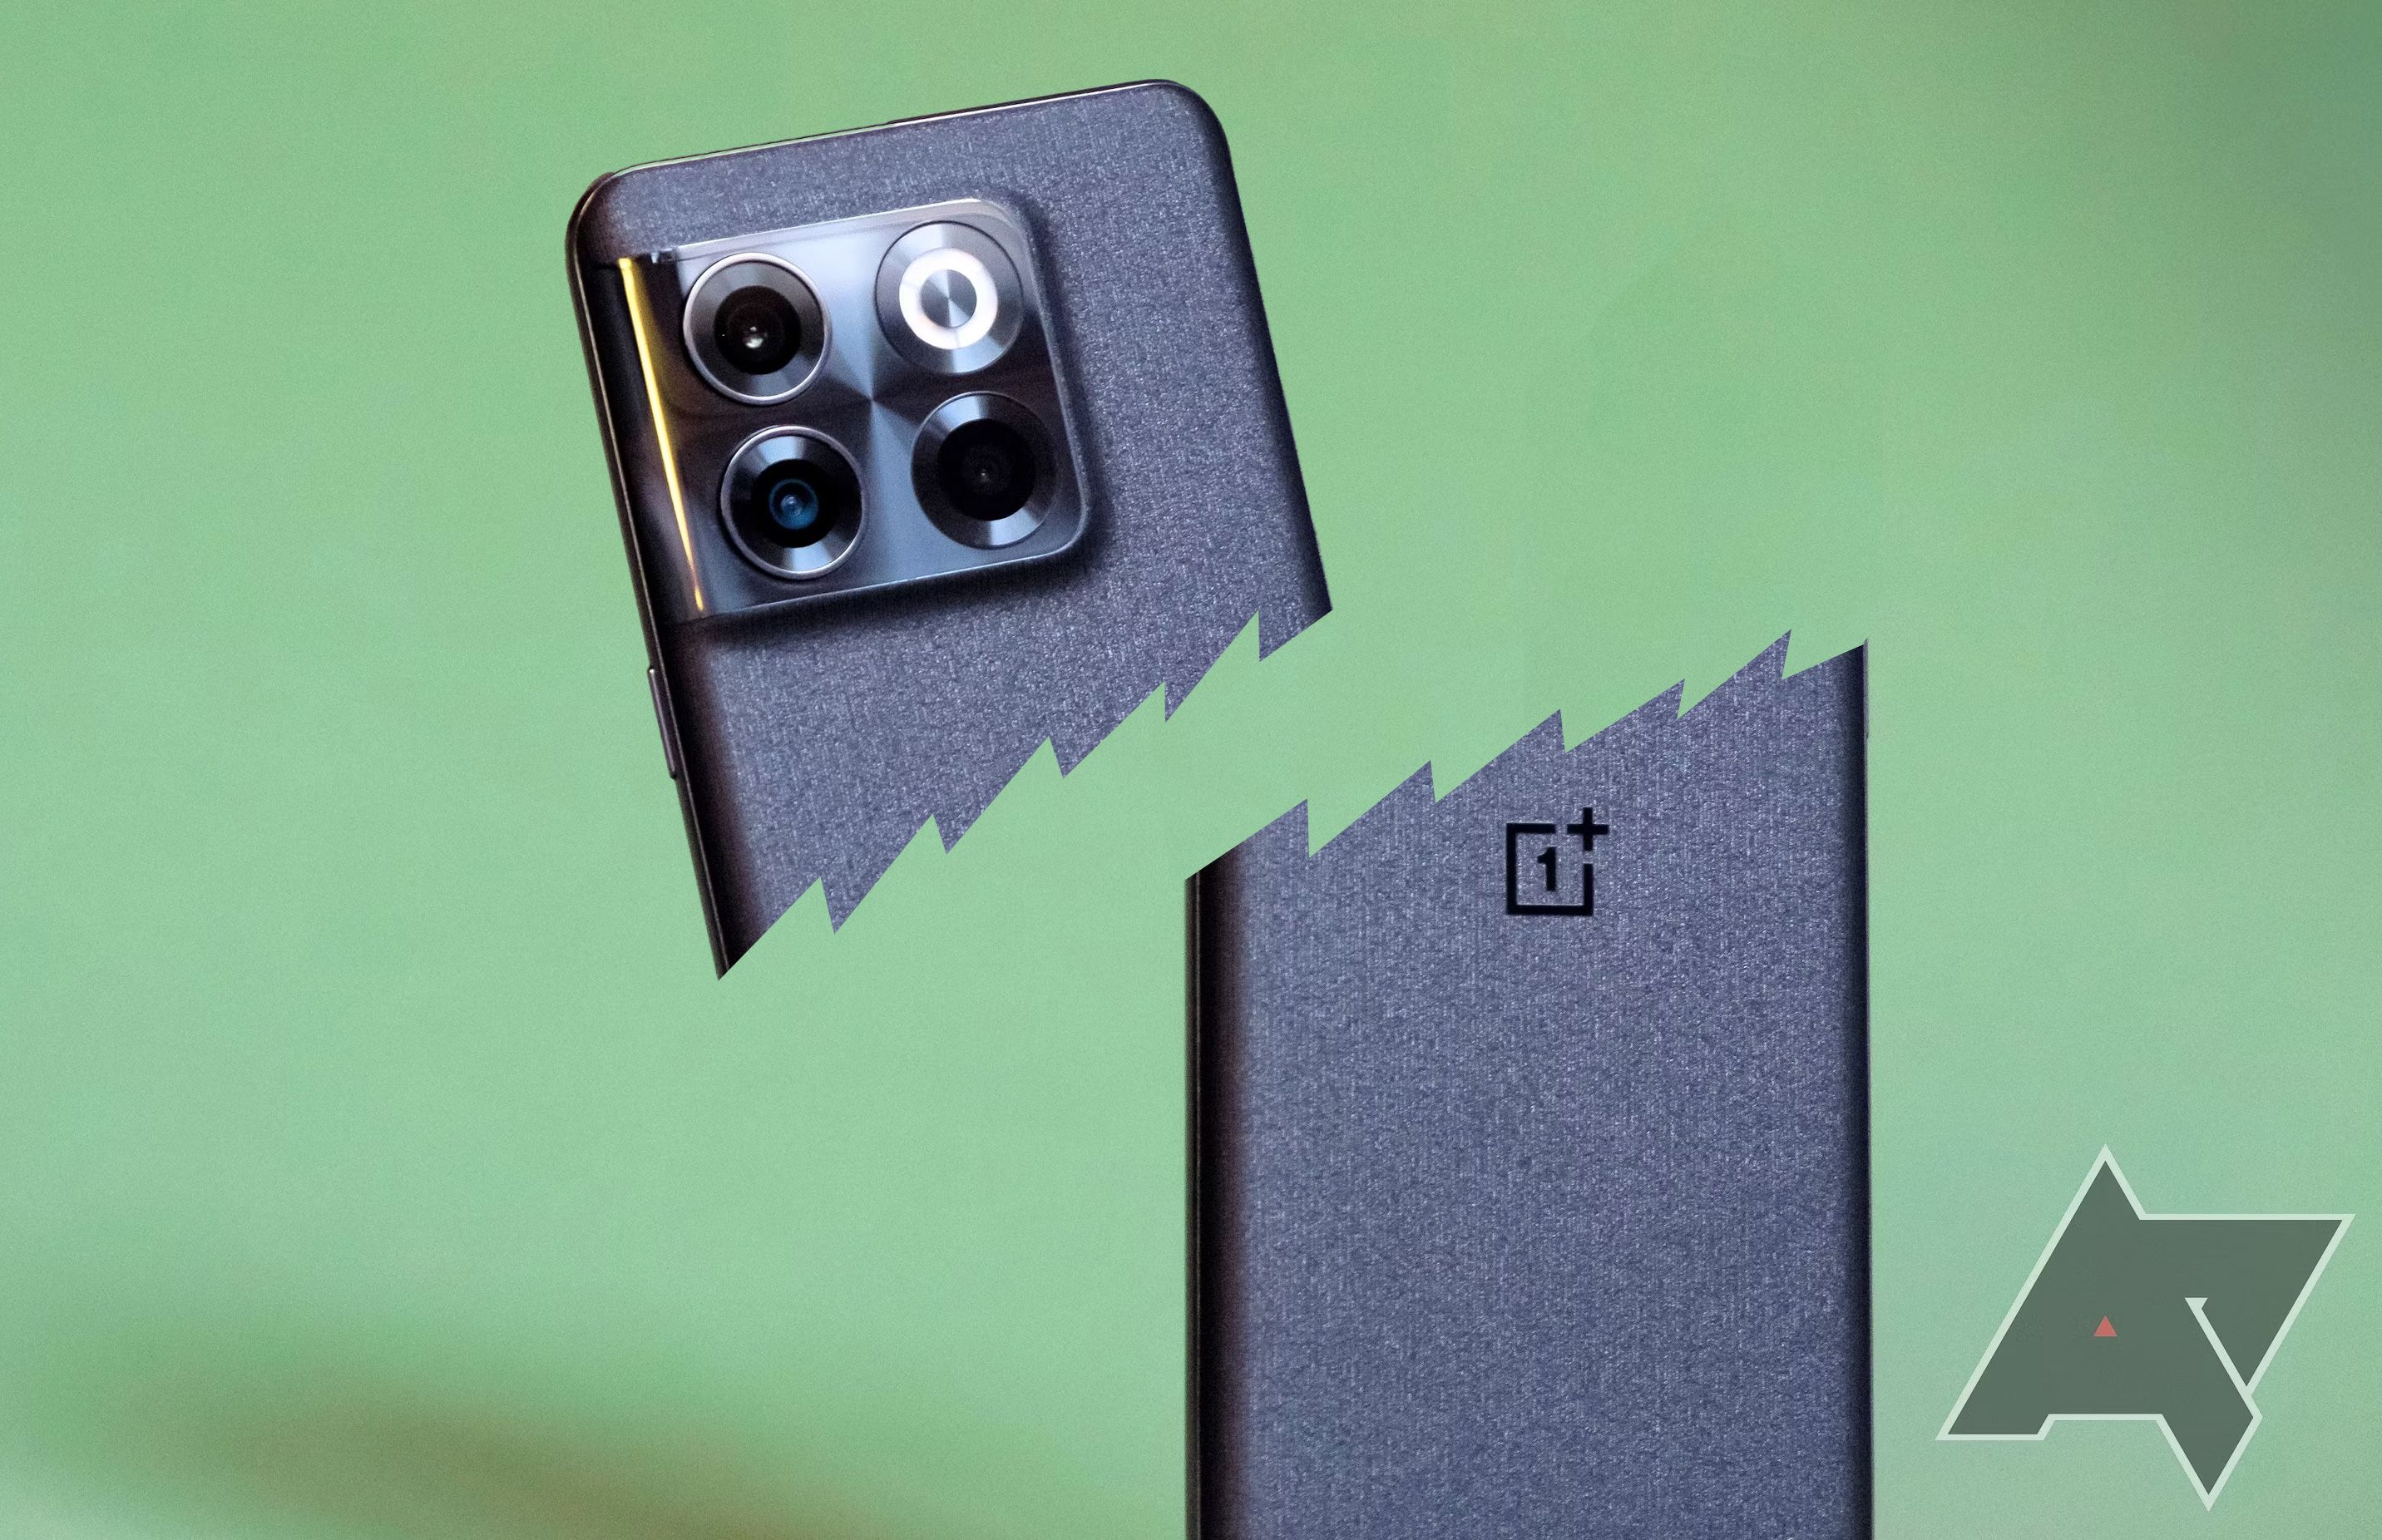 Folding the OnePlus 10T goes just about as tragically as it did for the 10 Pro